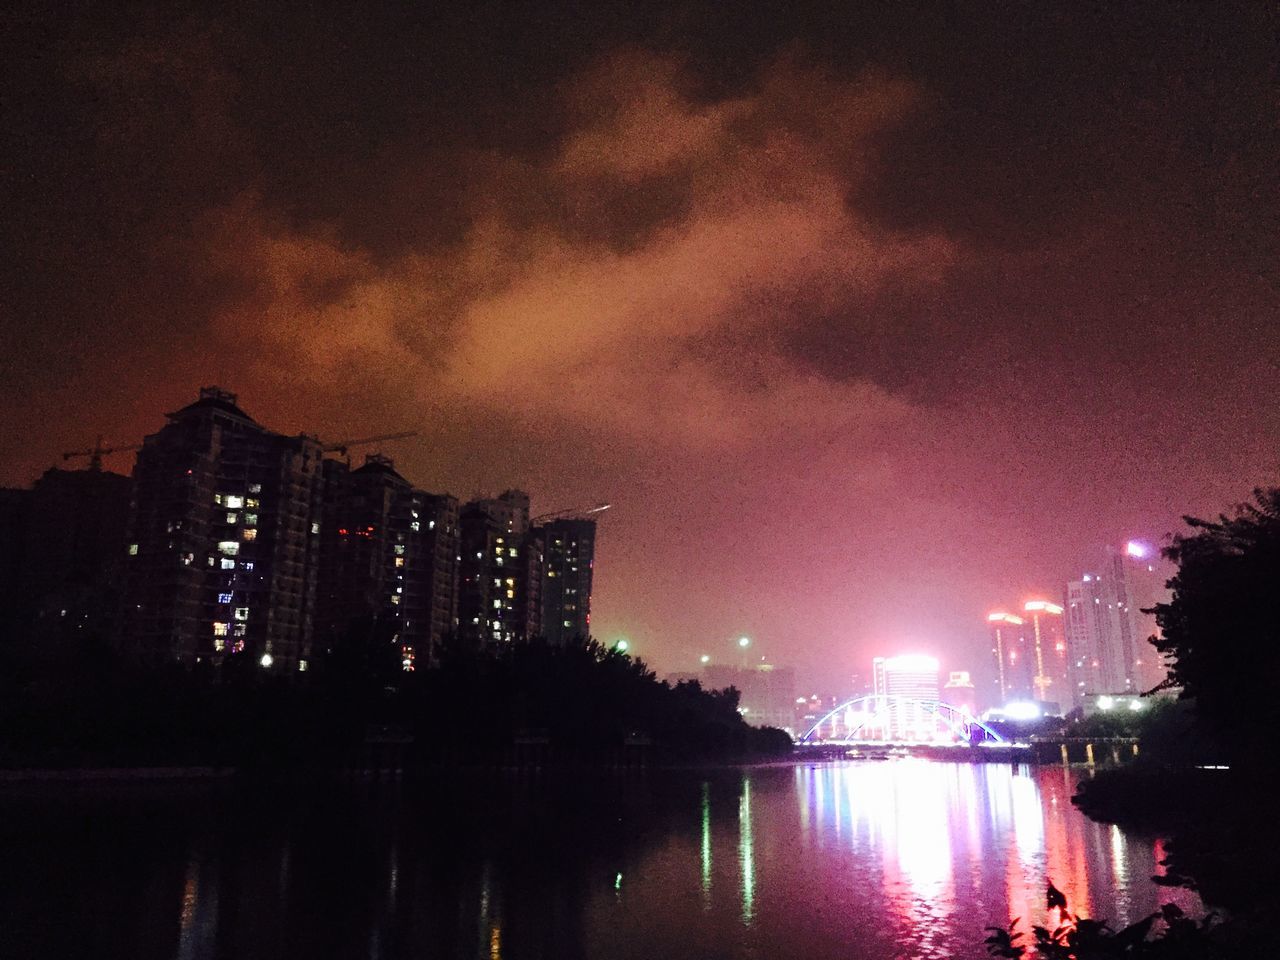 illuminated, city, building exterior, water, night, sky, architecture, built structure, cityscape, waterfront, reflection, skyscraper, river, urban skyline, cloud - sky, modern, city life, outdoors, no people, dusk